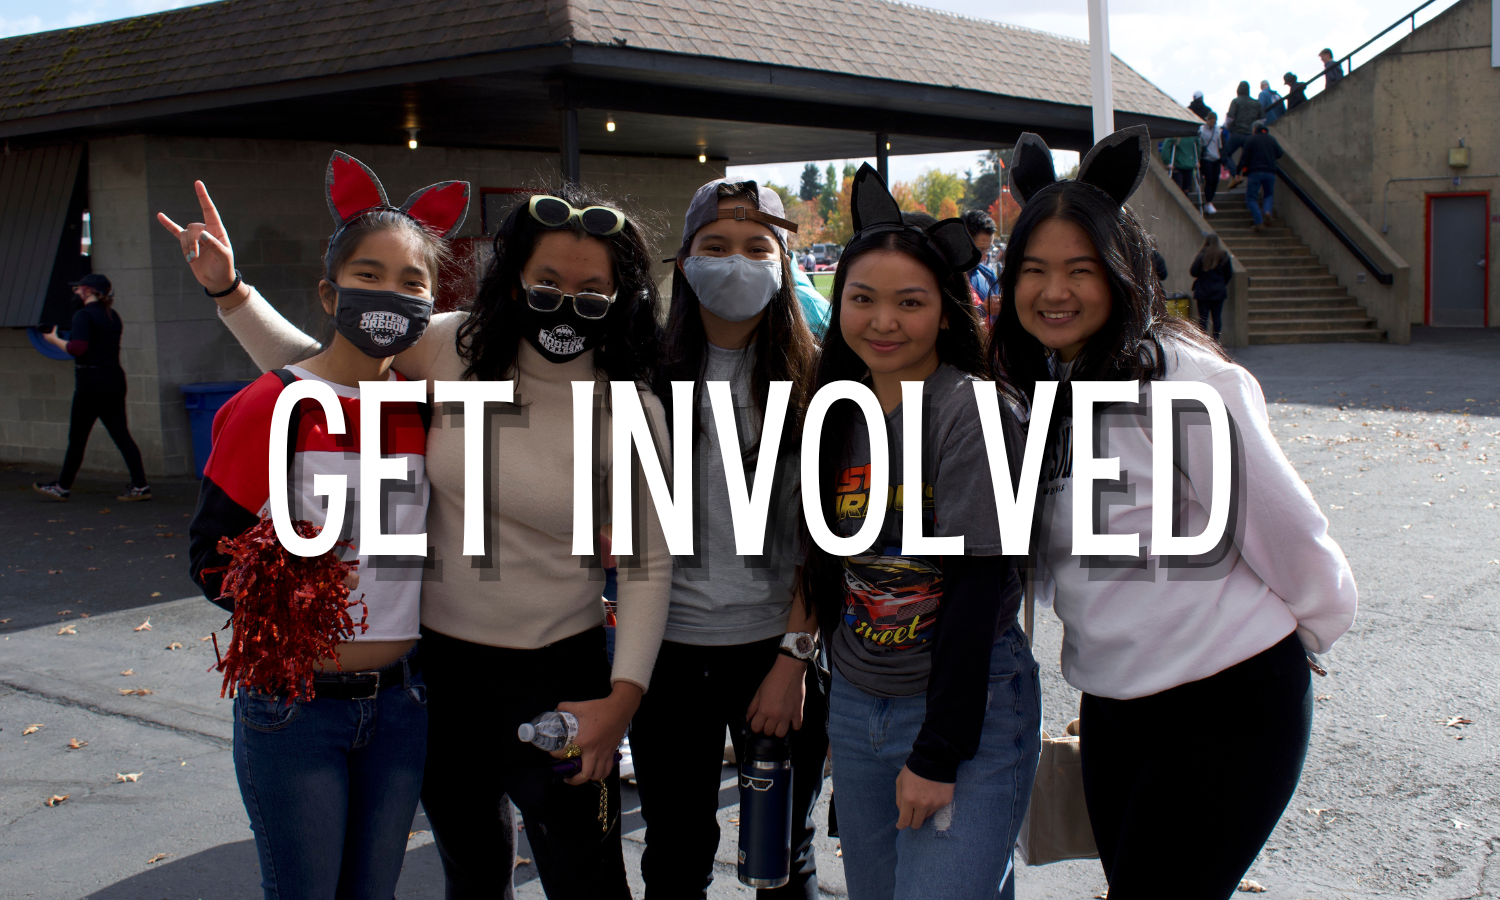 Students posed in a group with three out of the five students wearing Wolfie ears. The words "Get Involved" are superimposed over the group.